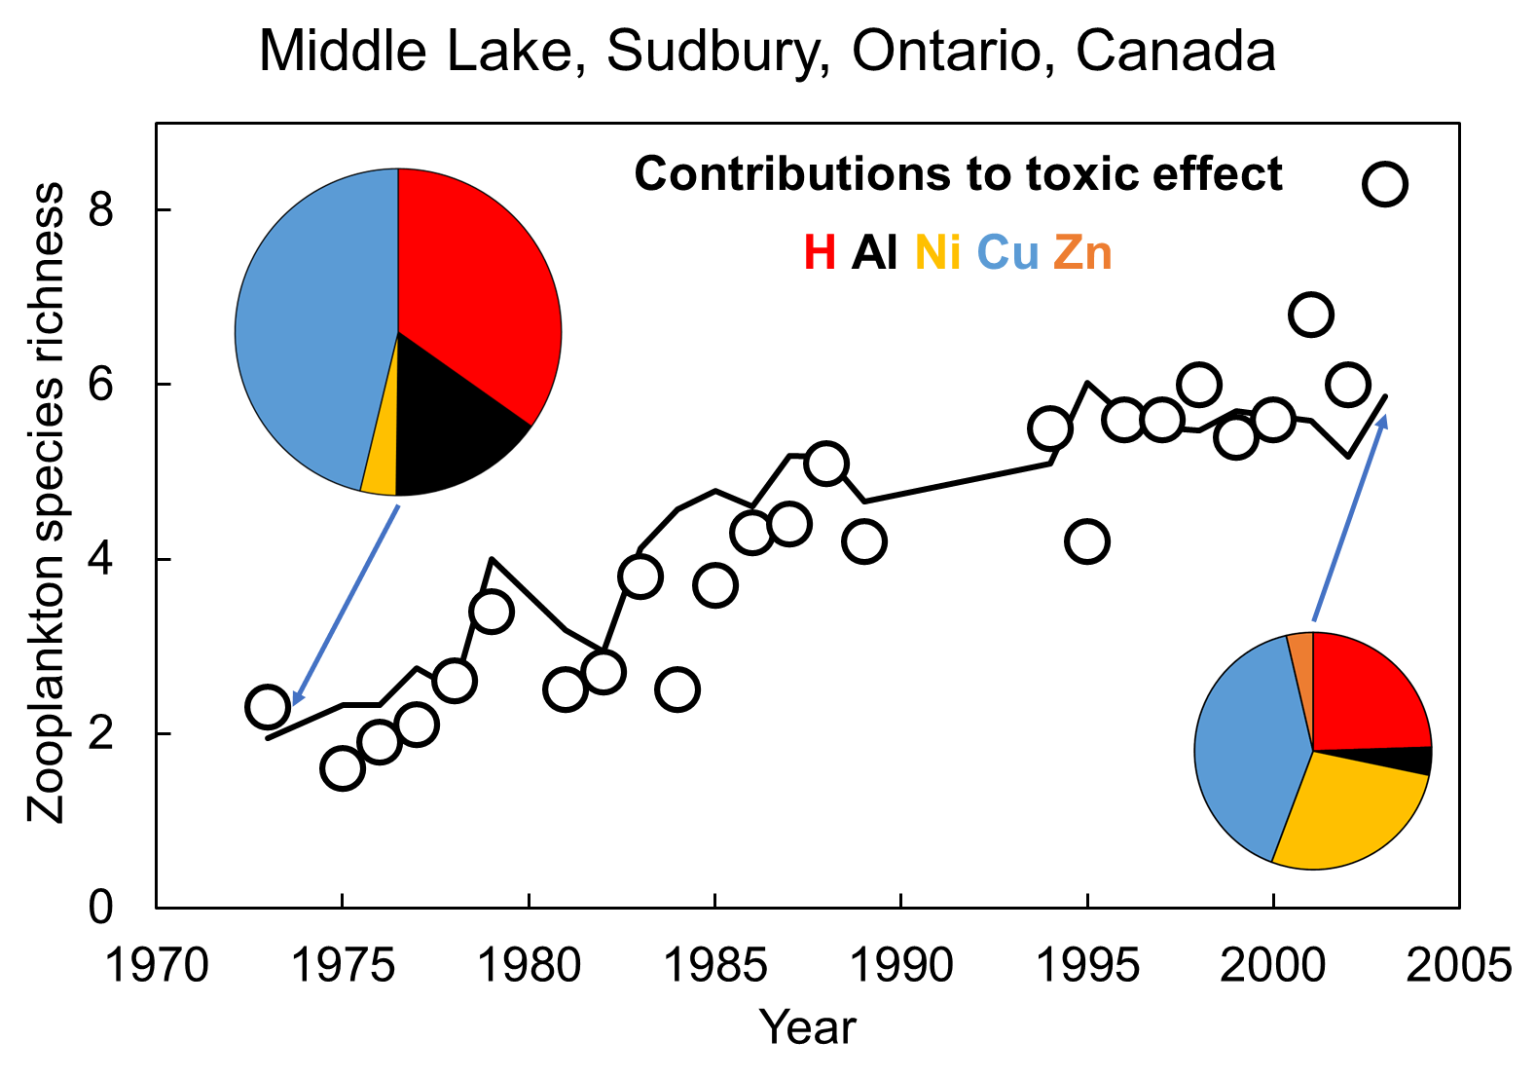 Chart showing change in zooplankton species richness and contributions of different metals to toxic effects